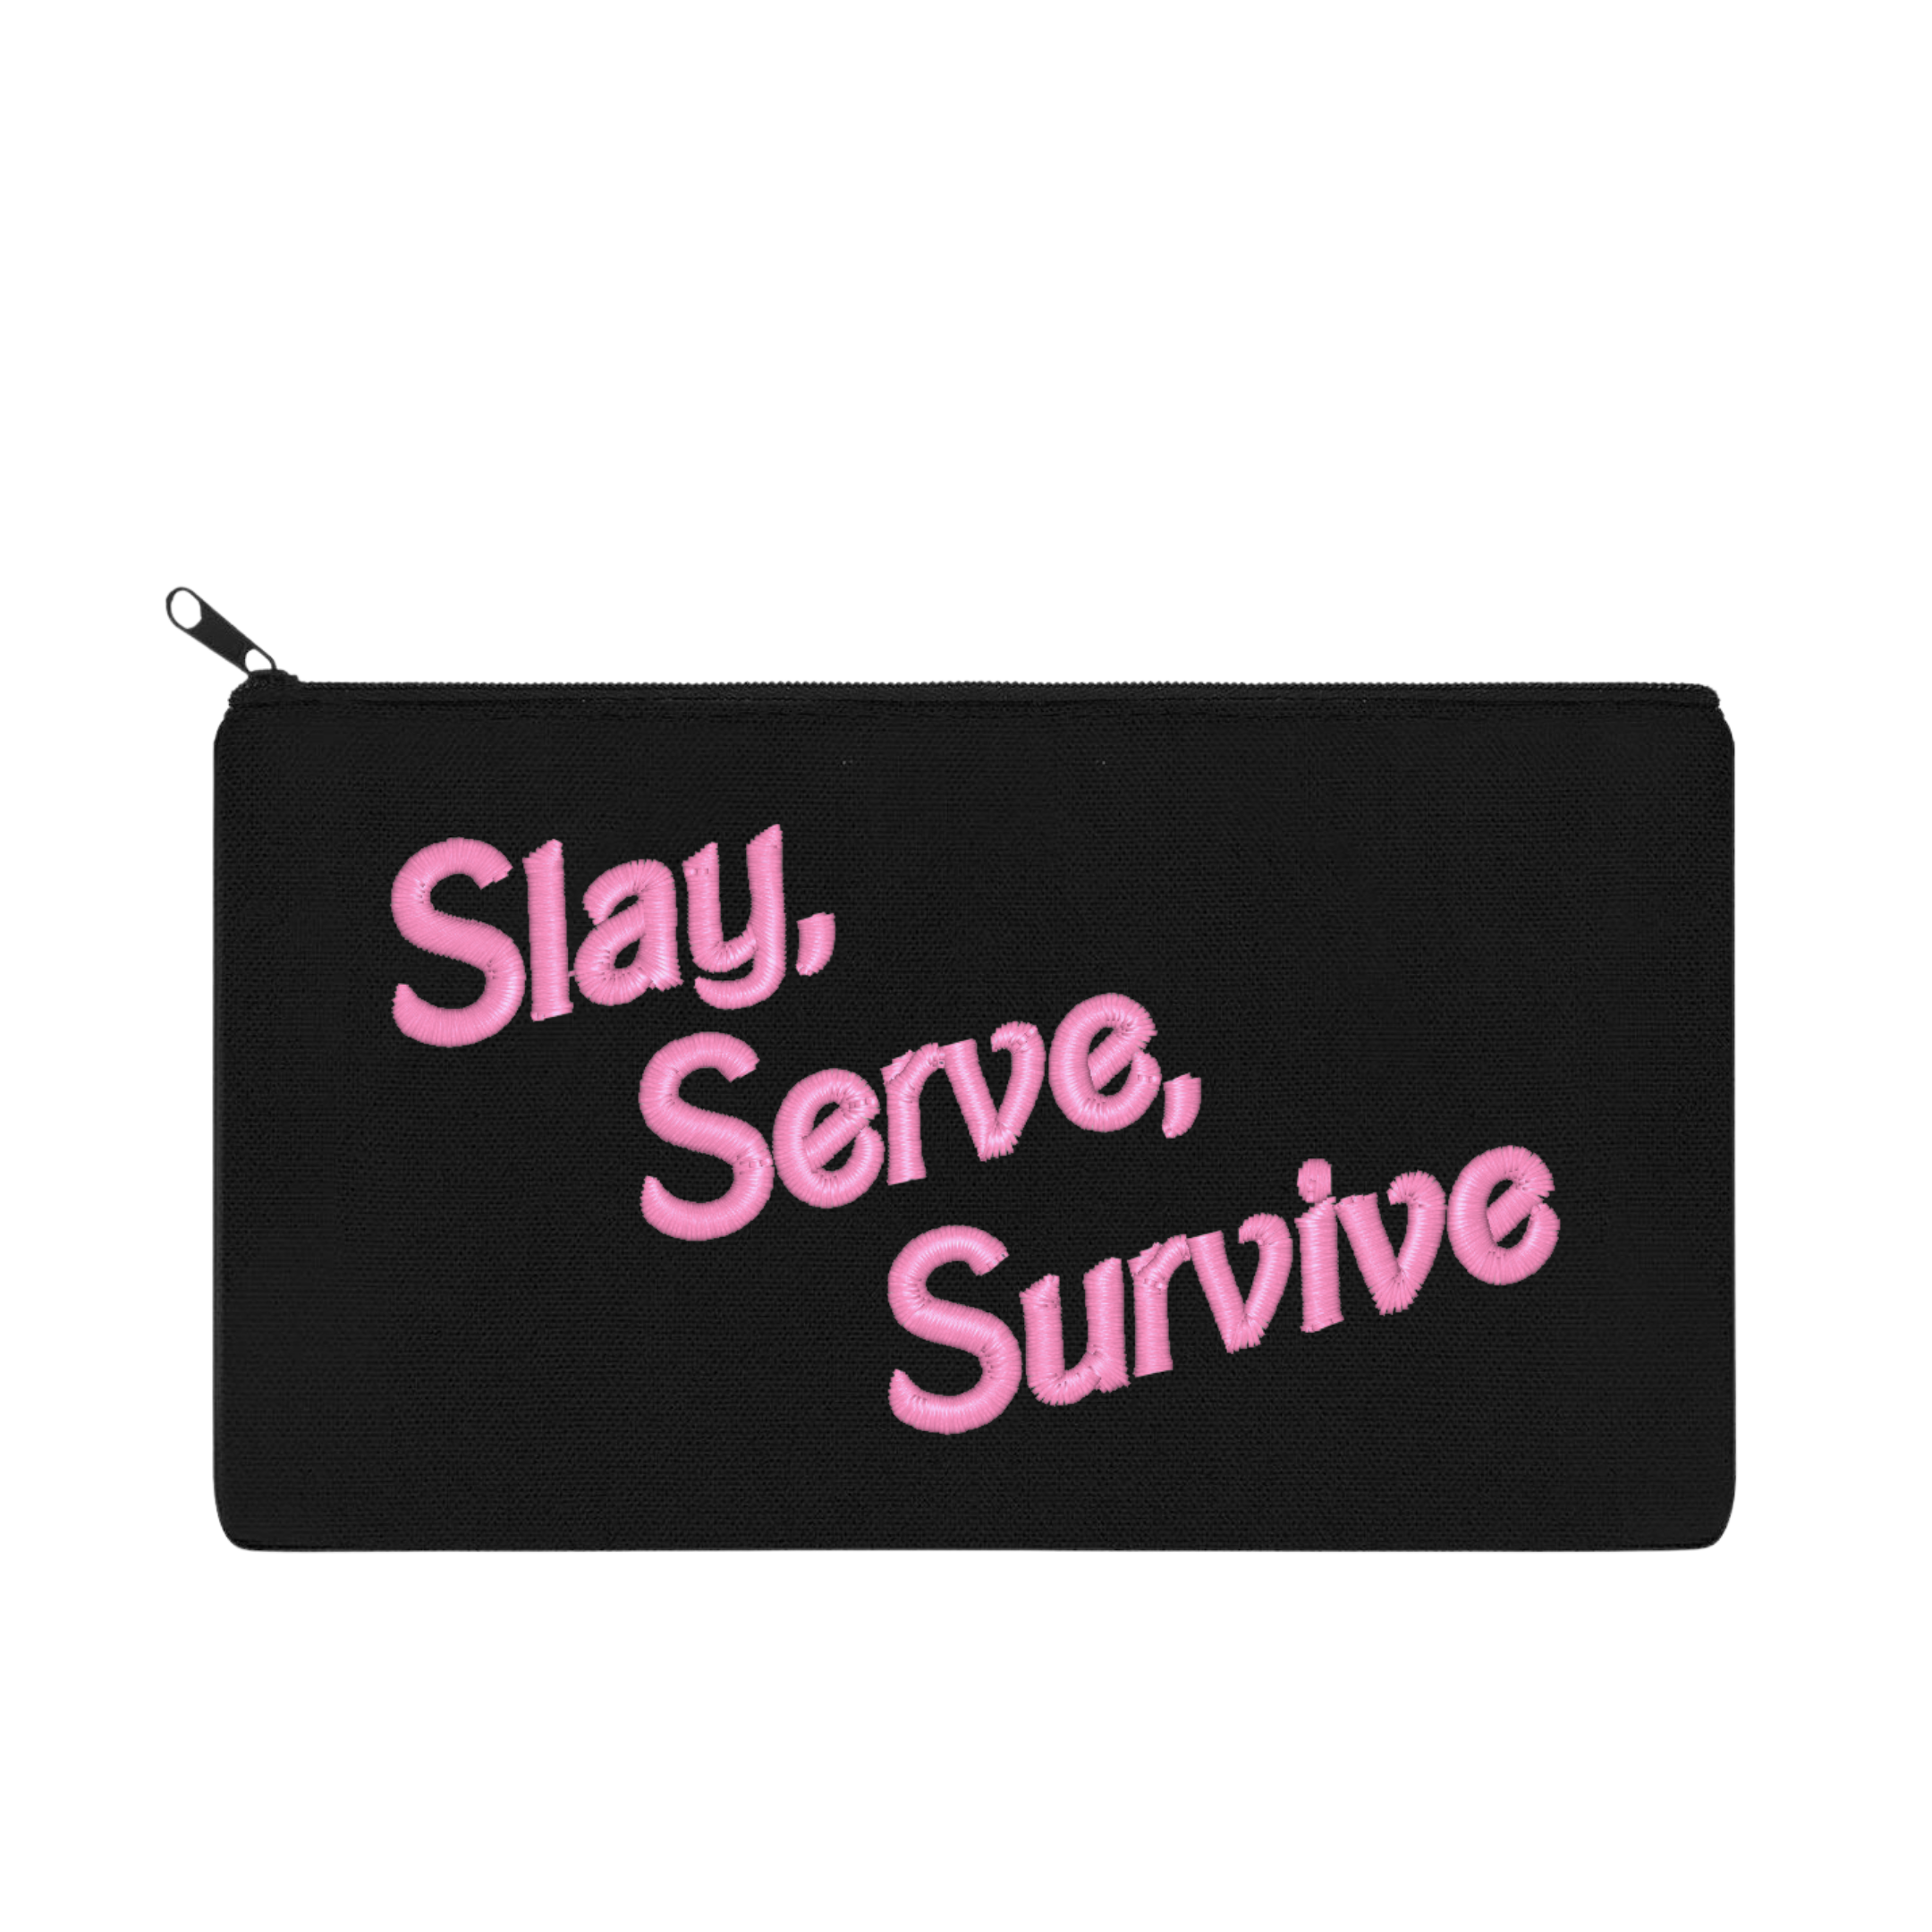 Slay. Serve. Survive. Embroidered Multipurpose Zipper Pouch Bag